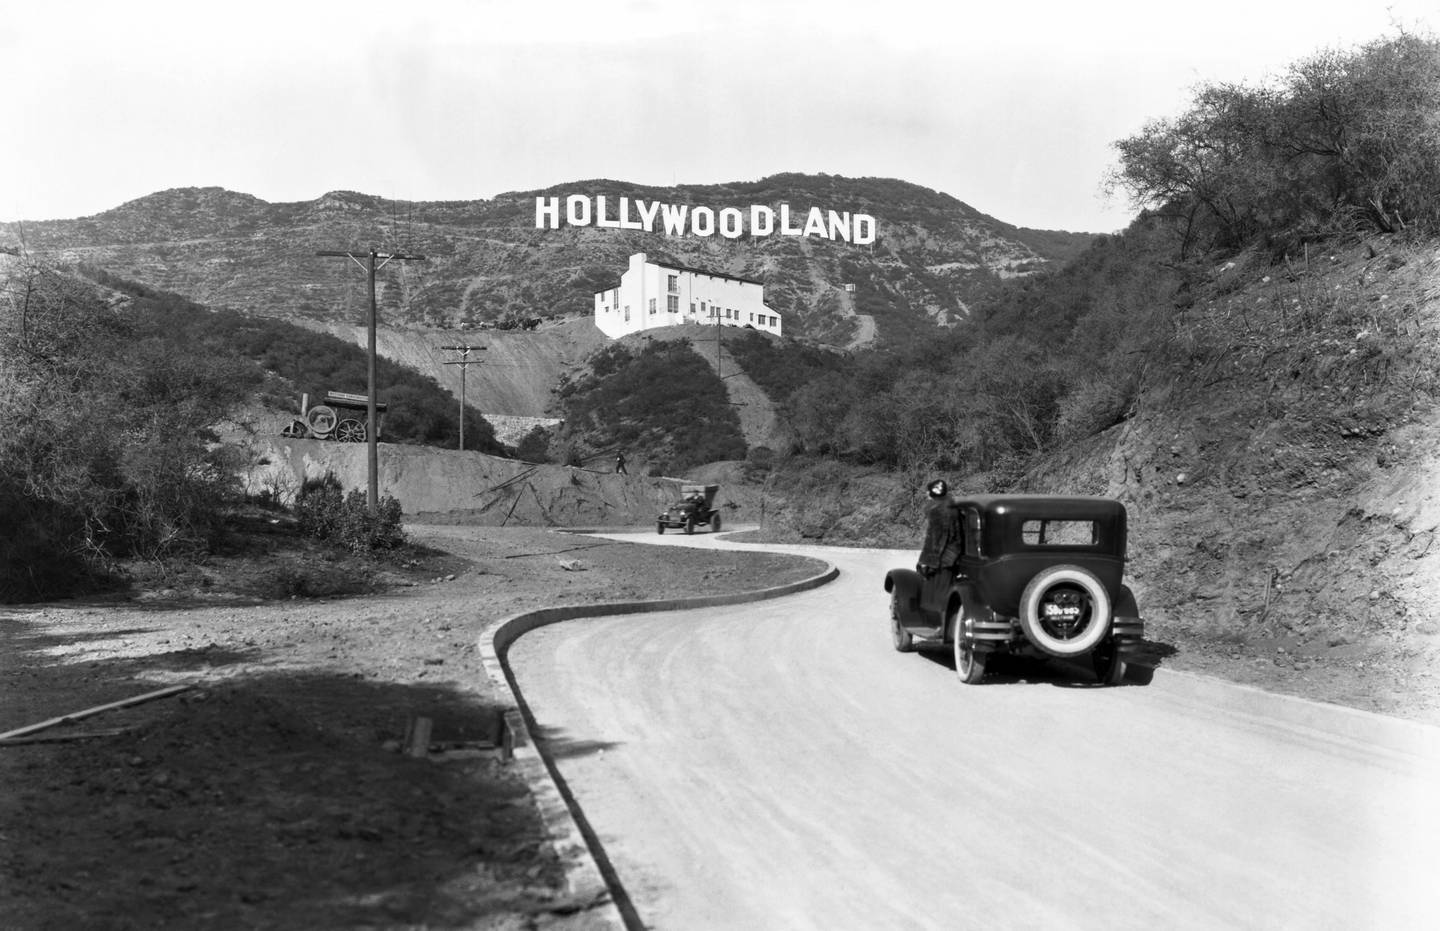 The original Hollywood sign advertised the opening of the Hollywoodland housing development in the hills on Mulholland Drive overlooking Los Angeles, Hollywood. Underwood Archives / Getty Images